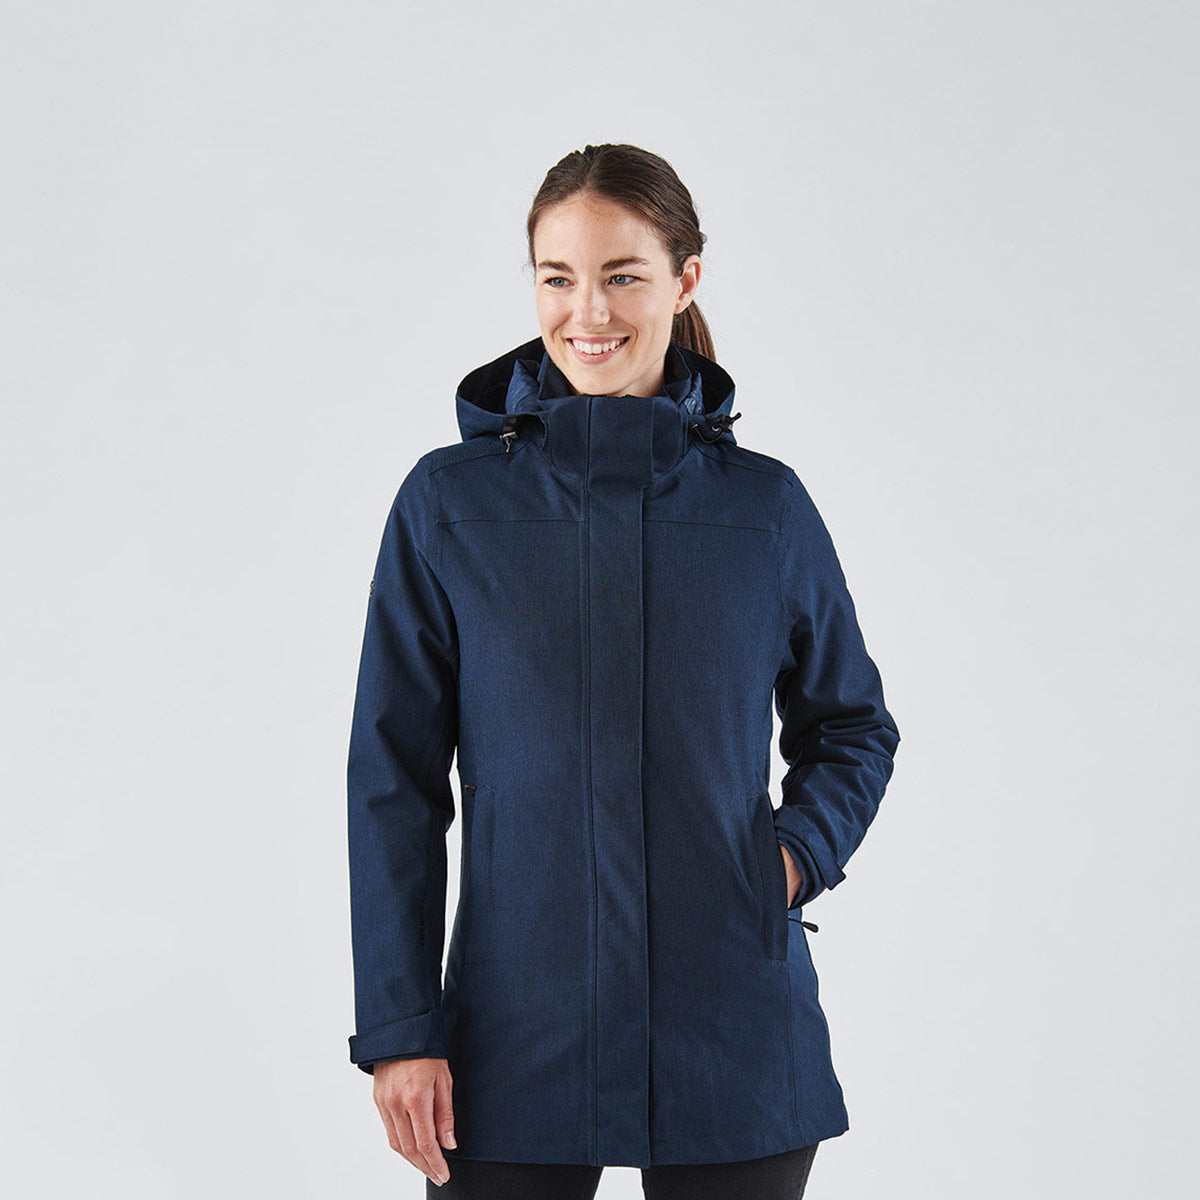 Avalanche Women's Zip Up Lightweight Quilted Jacket With Pockets